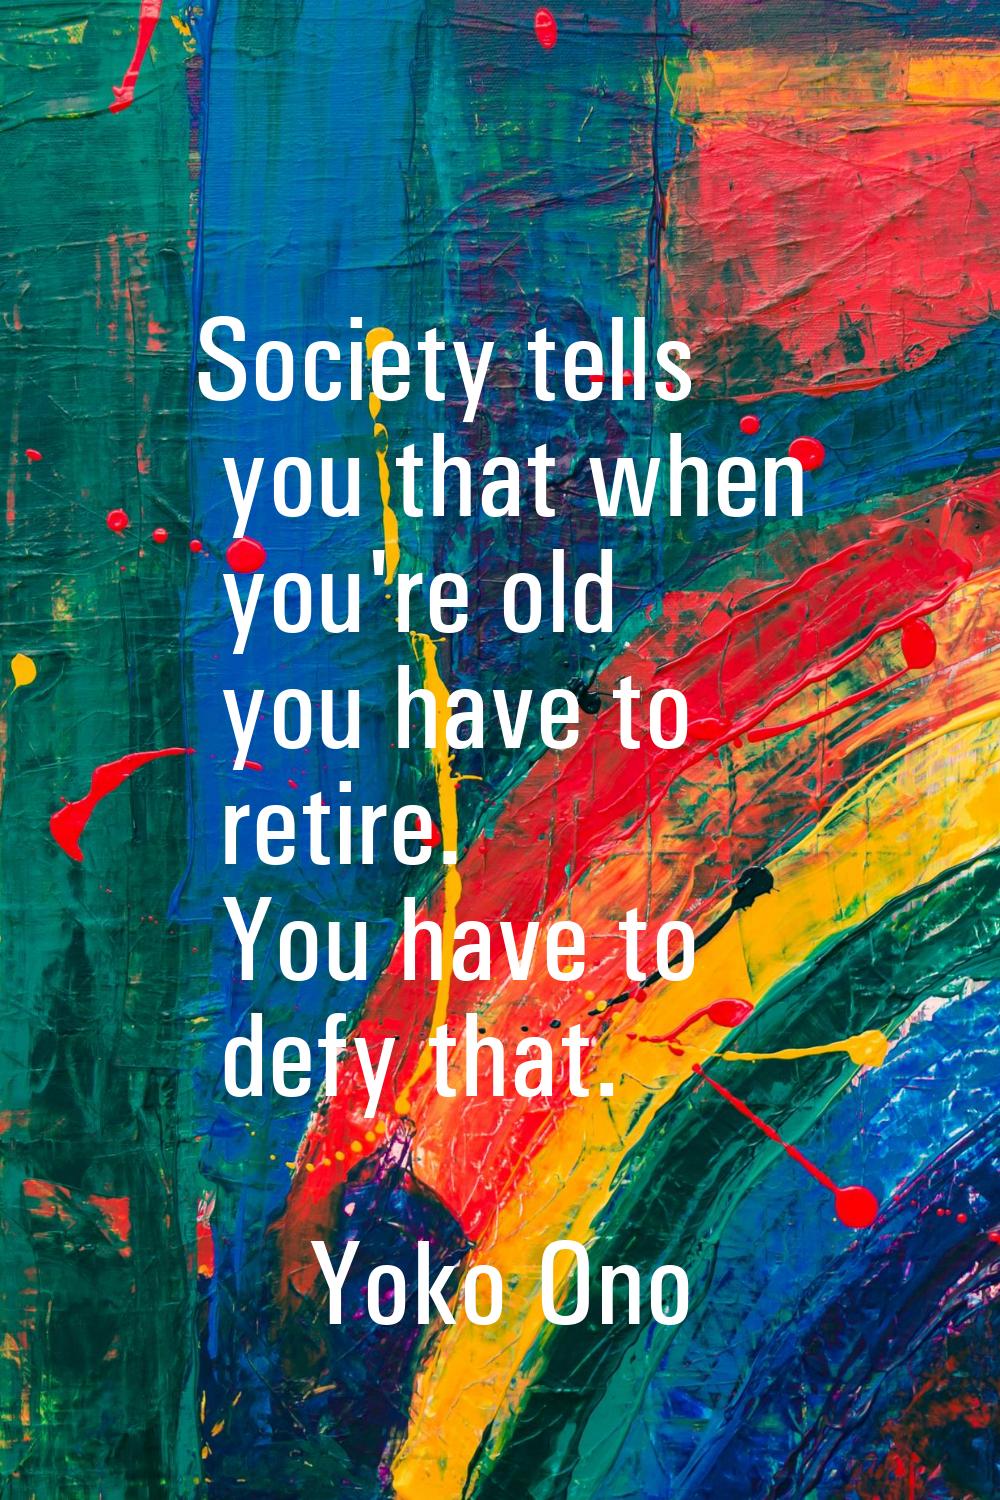 Society tells you that when you're old you have to retire. You have to defy that.